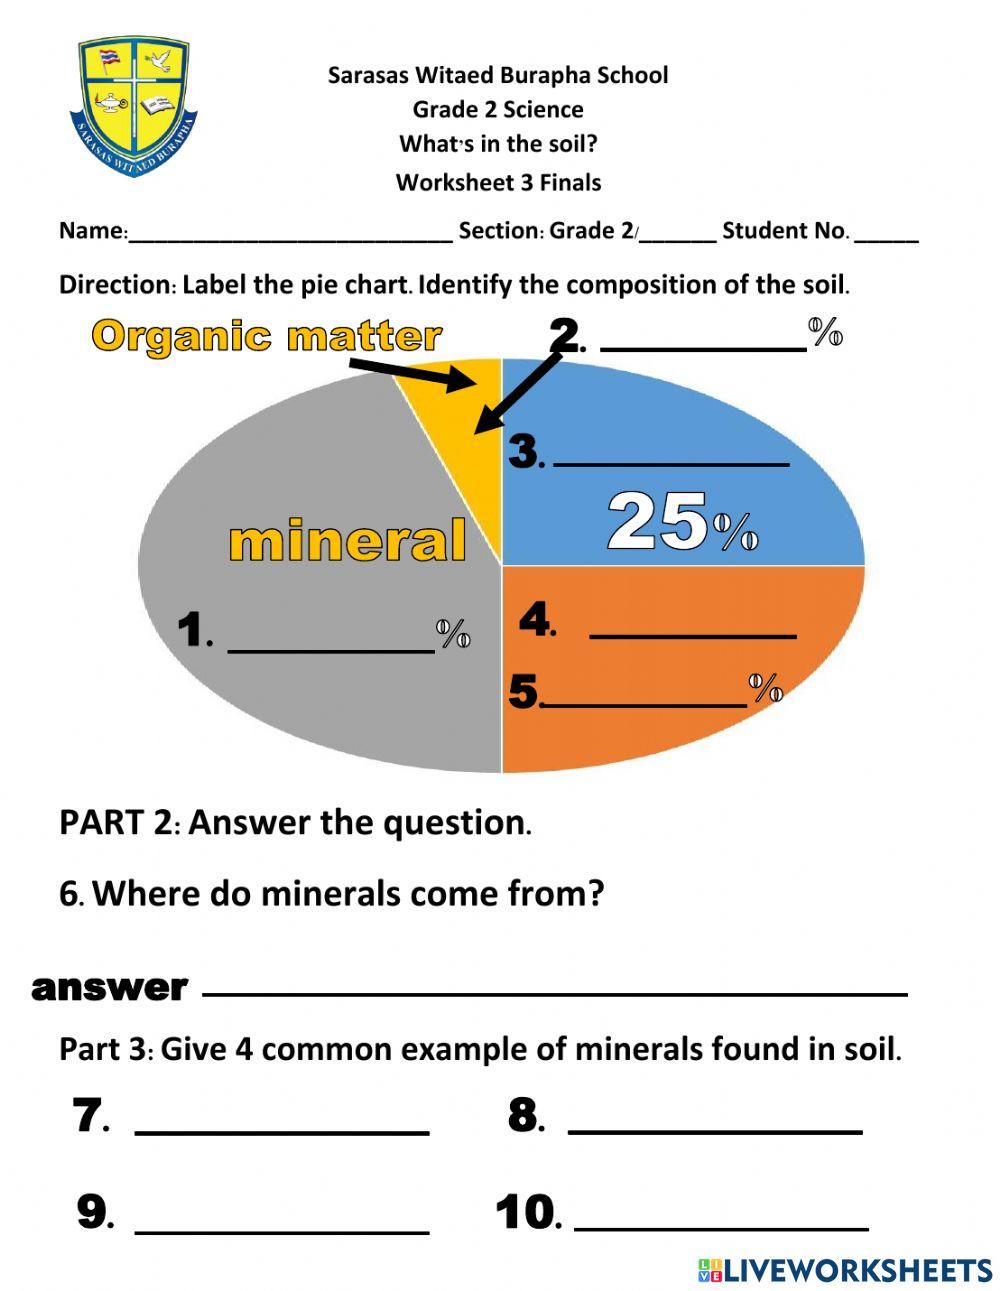 Worksheet 3, What is in the soil?, Finals, Minerals